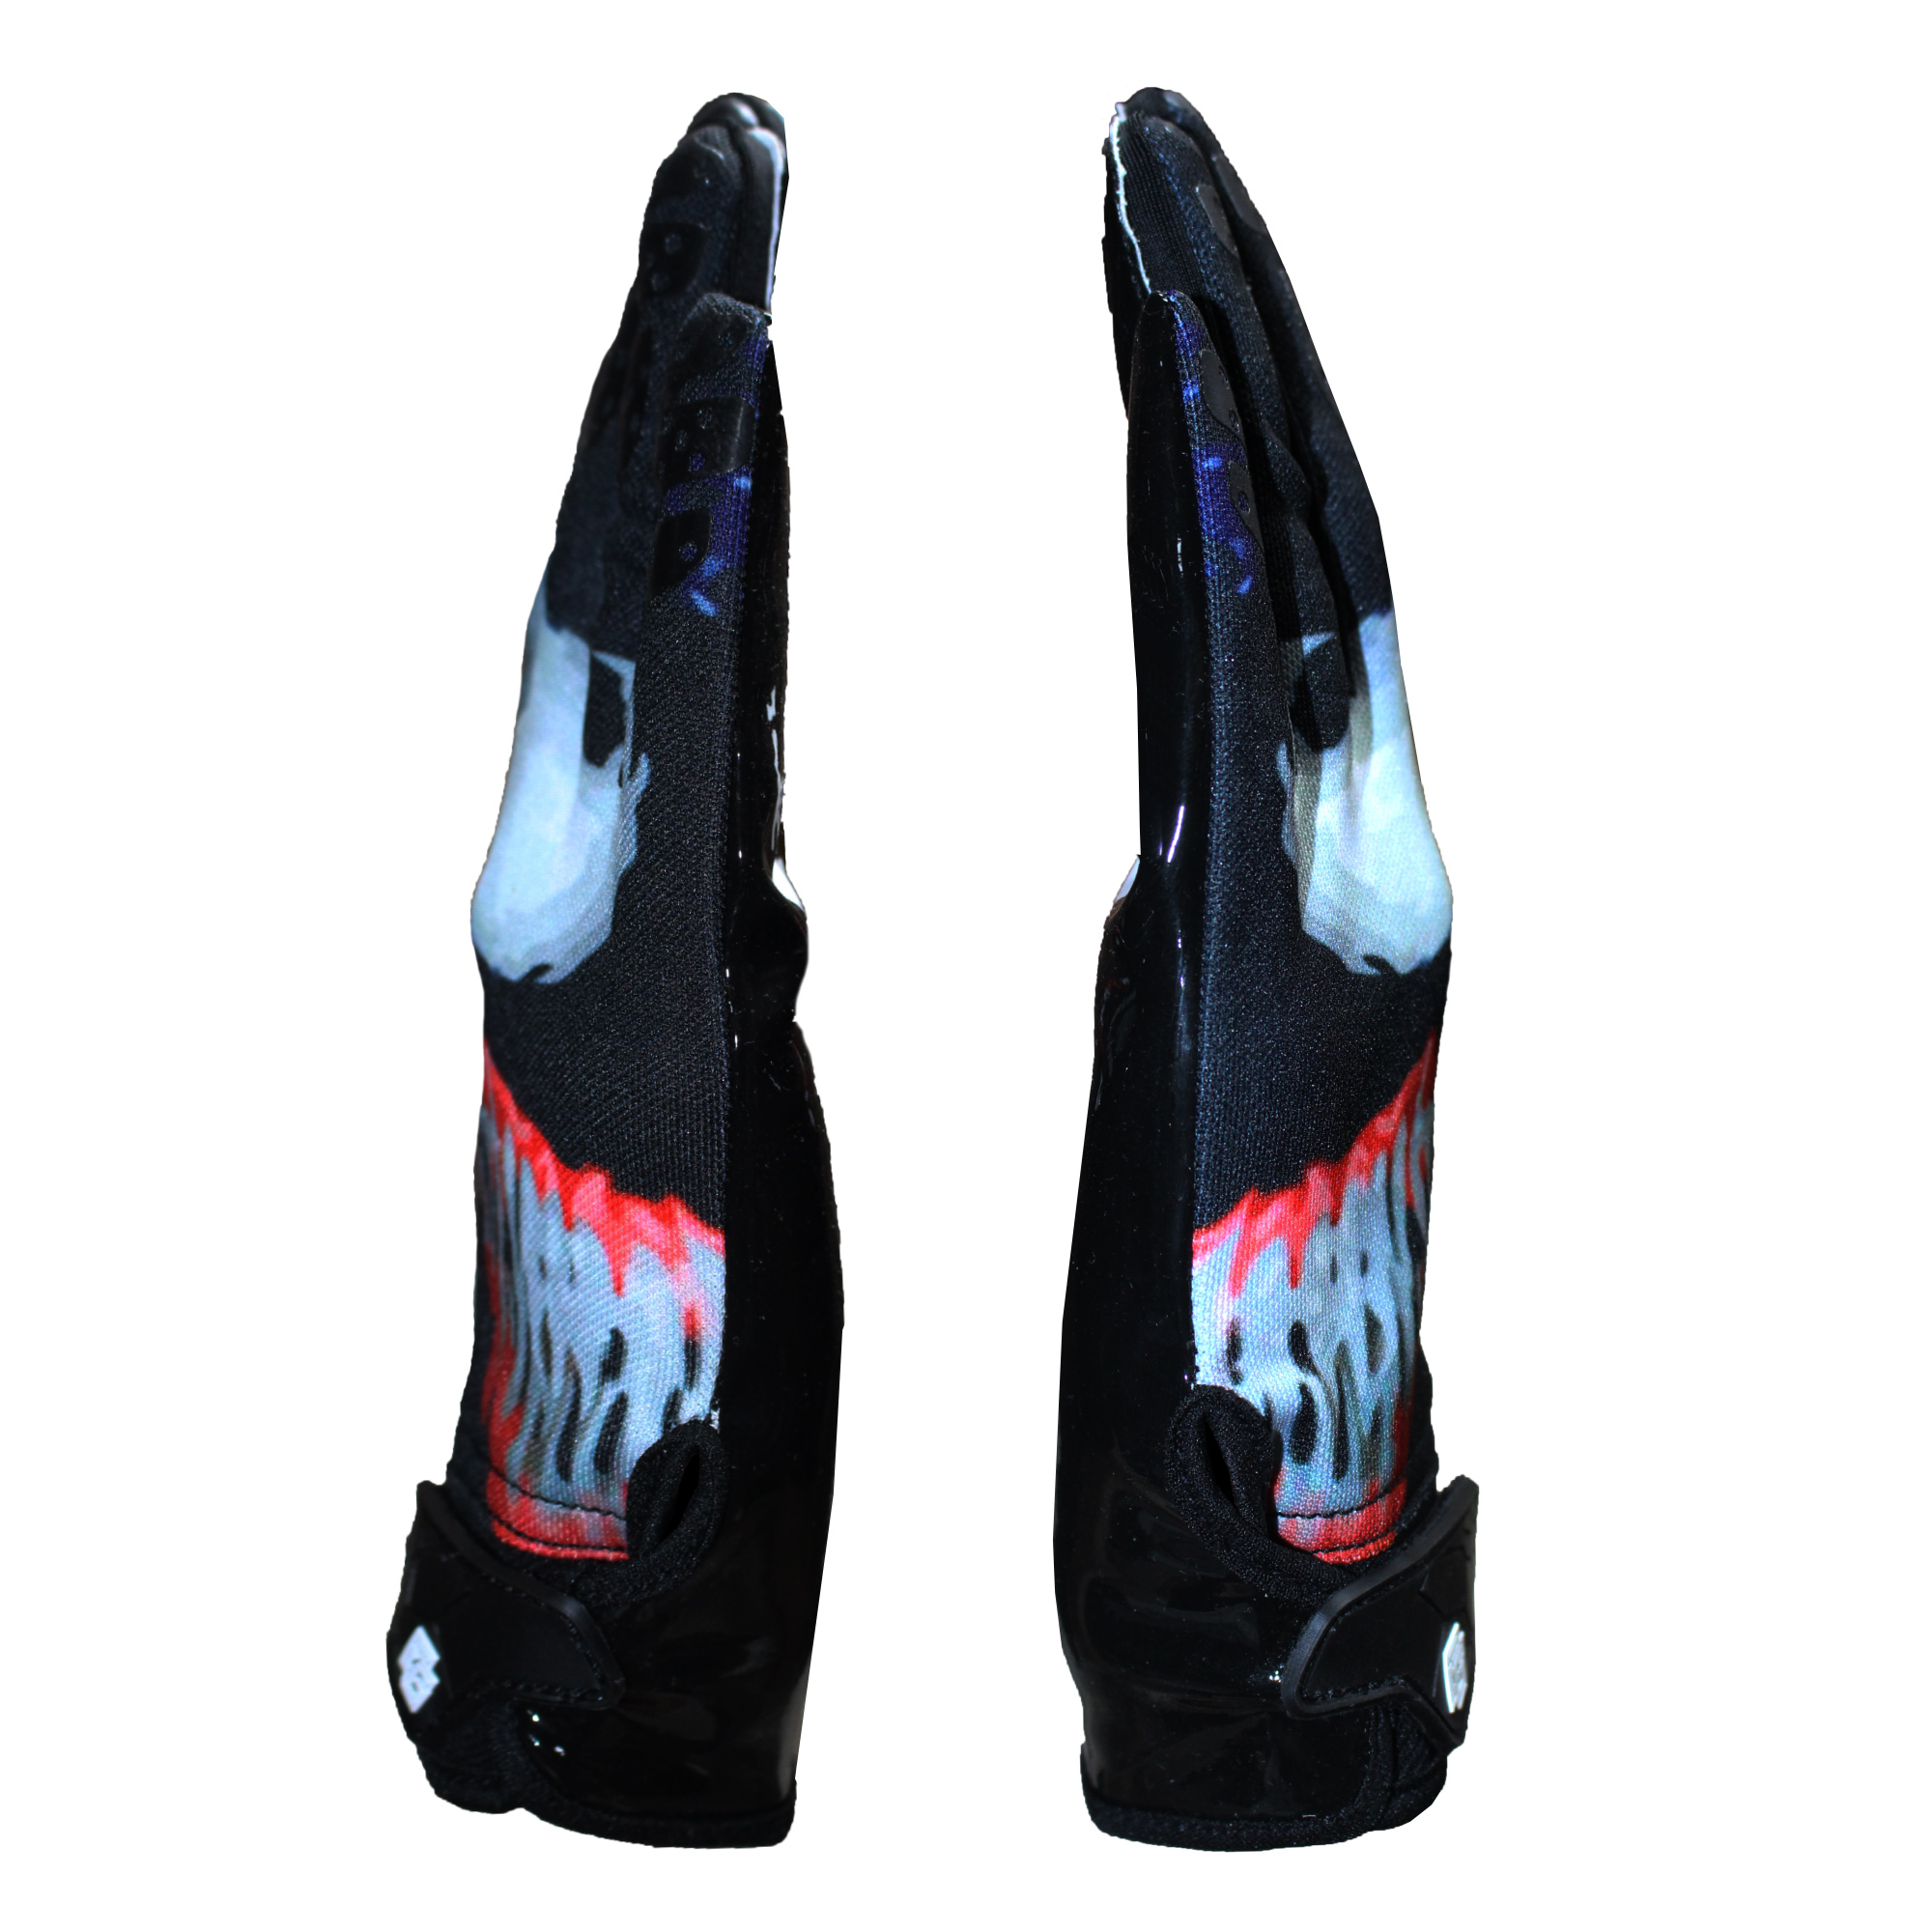 Eternity Gears Villain Football Gloves - Pro Elite Super Sticky Receiver Football Gloves - Adult Sizes - image 3 of 5